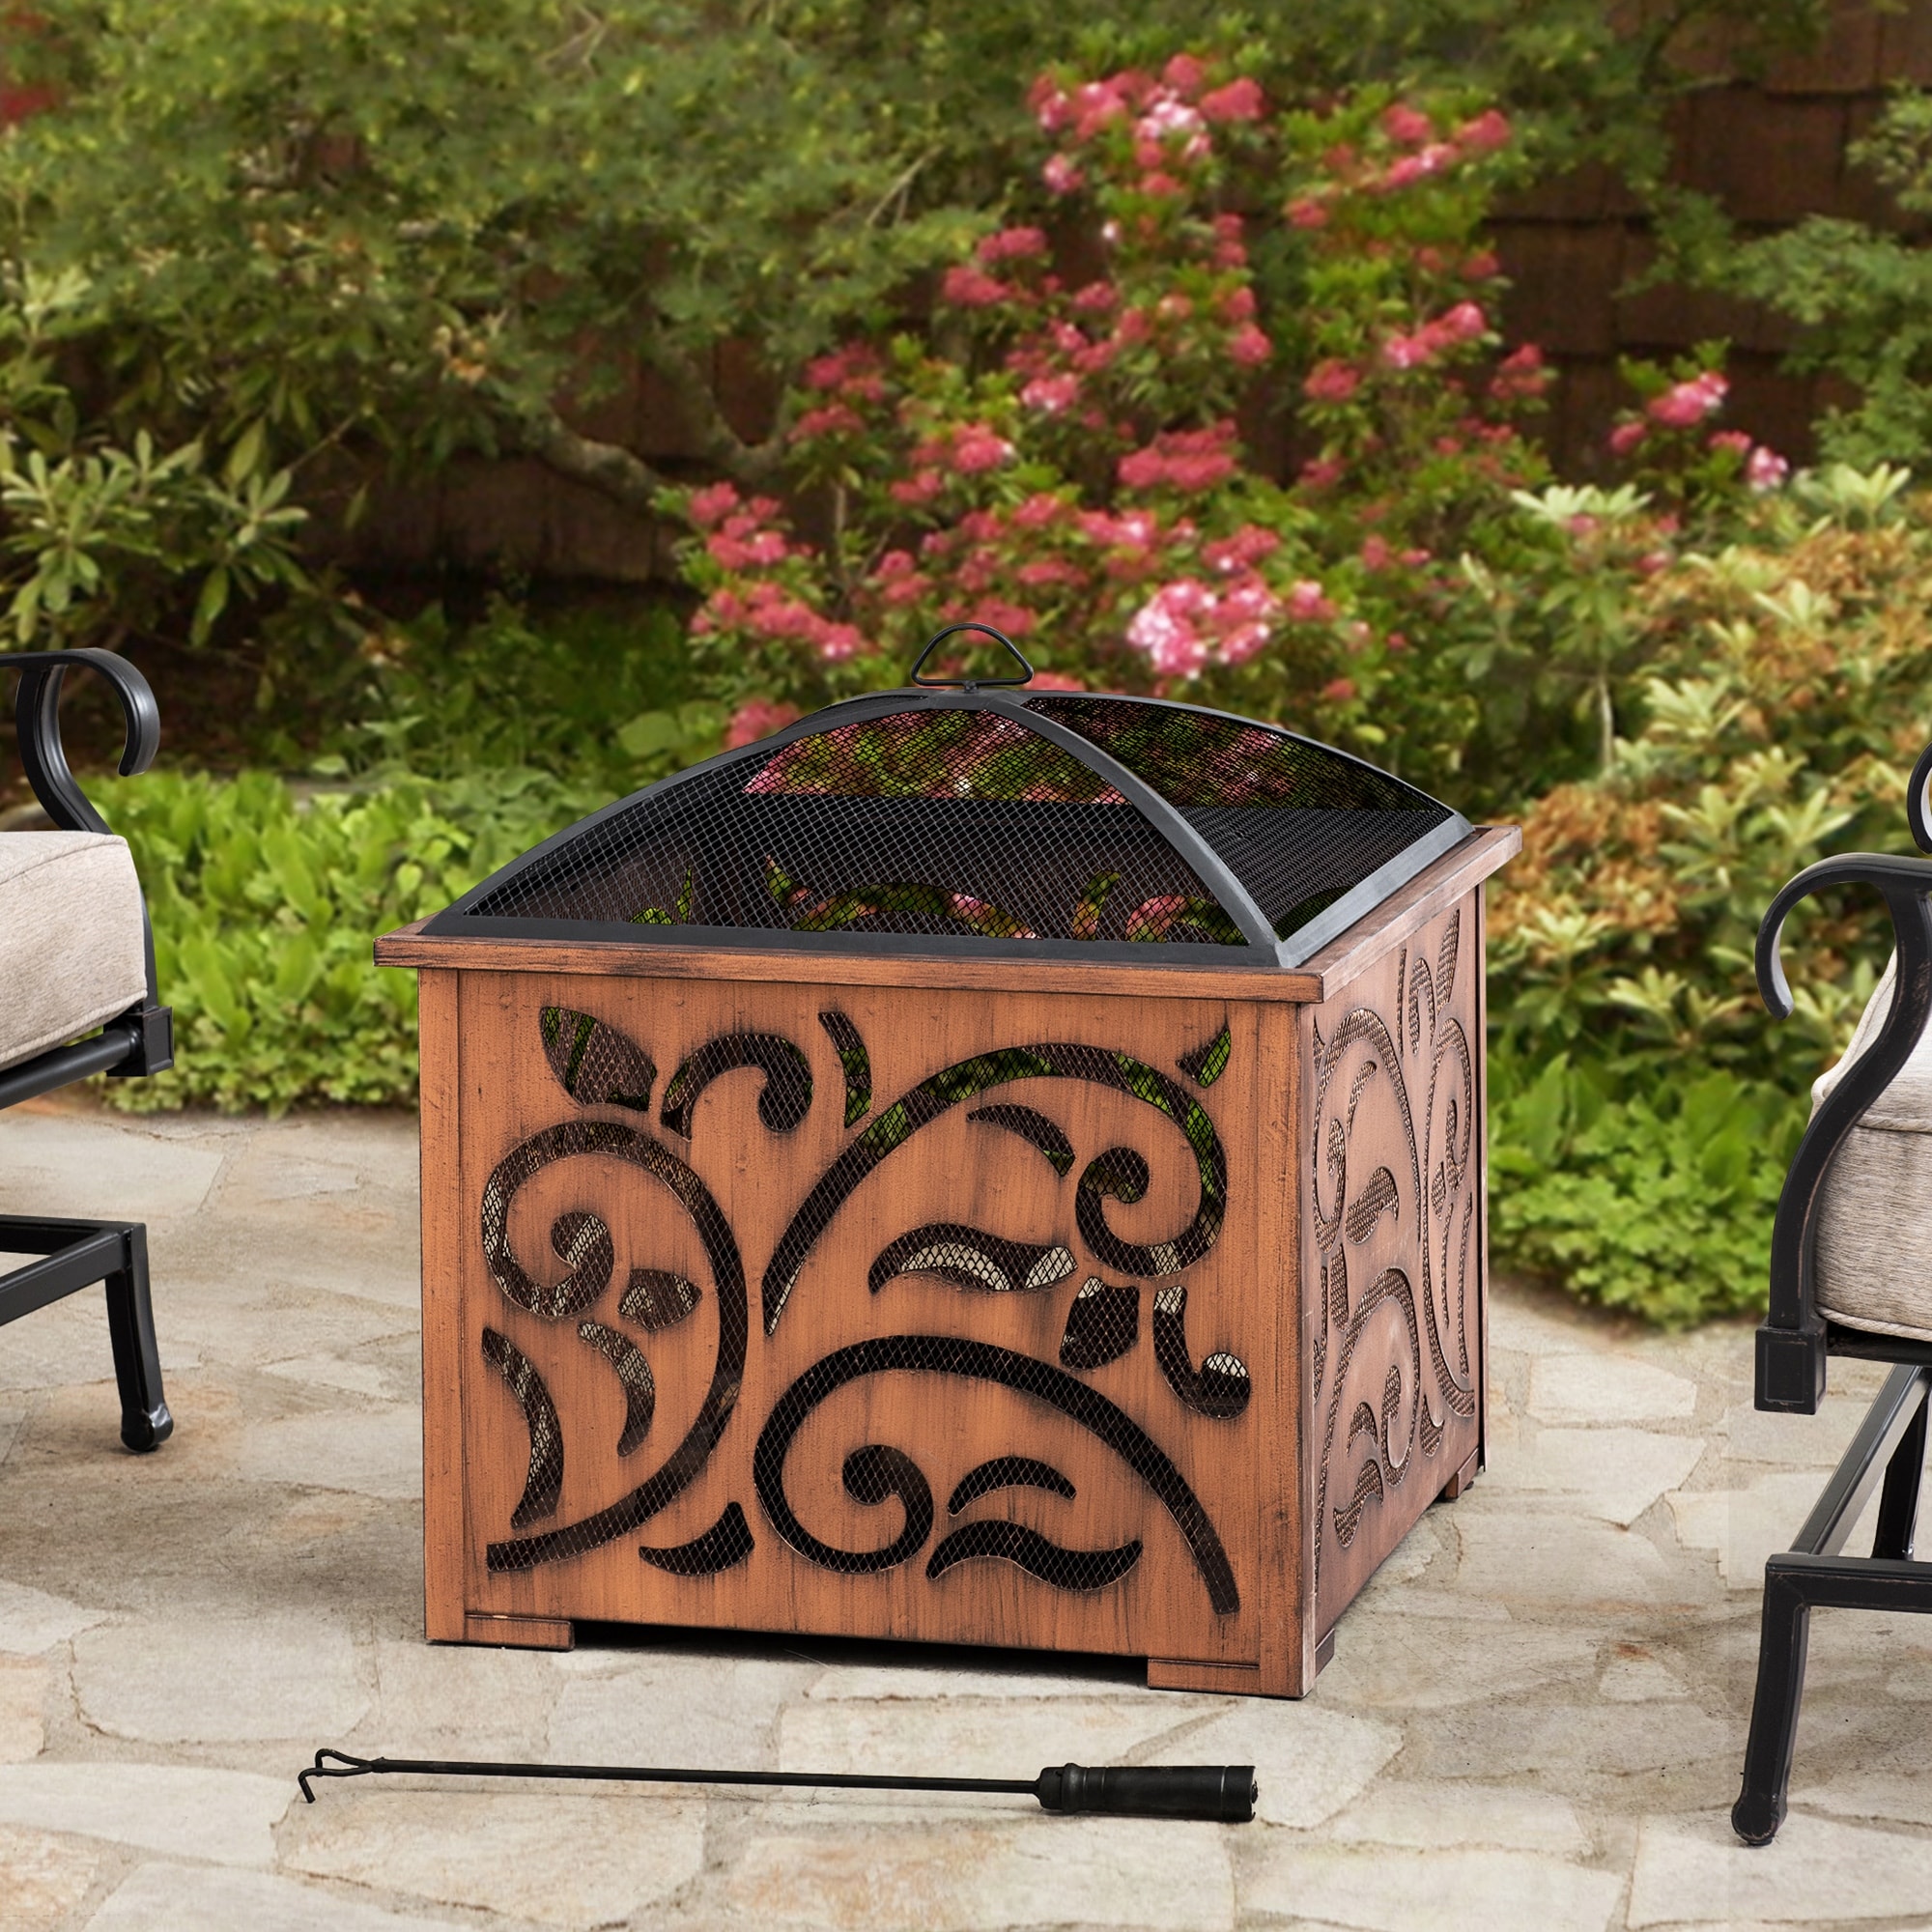 Sunjoy Outdoor 26 in. Copper Steel Wood-Burning Fire Pit for Outside with Steel Mesh Screen and Fire Poker